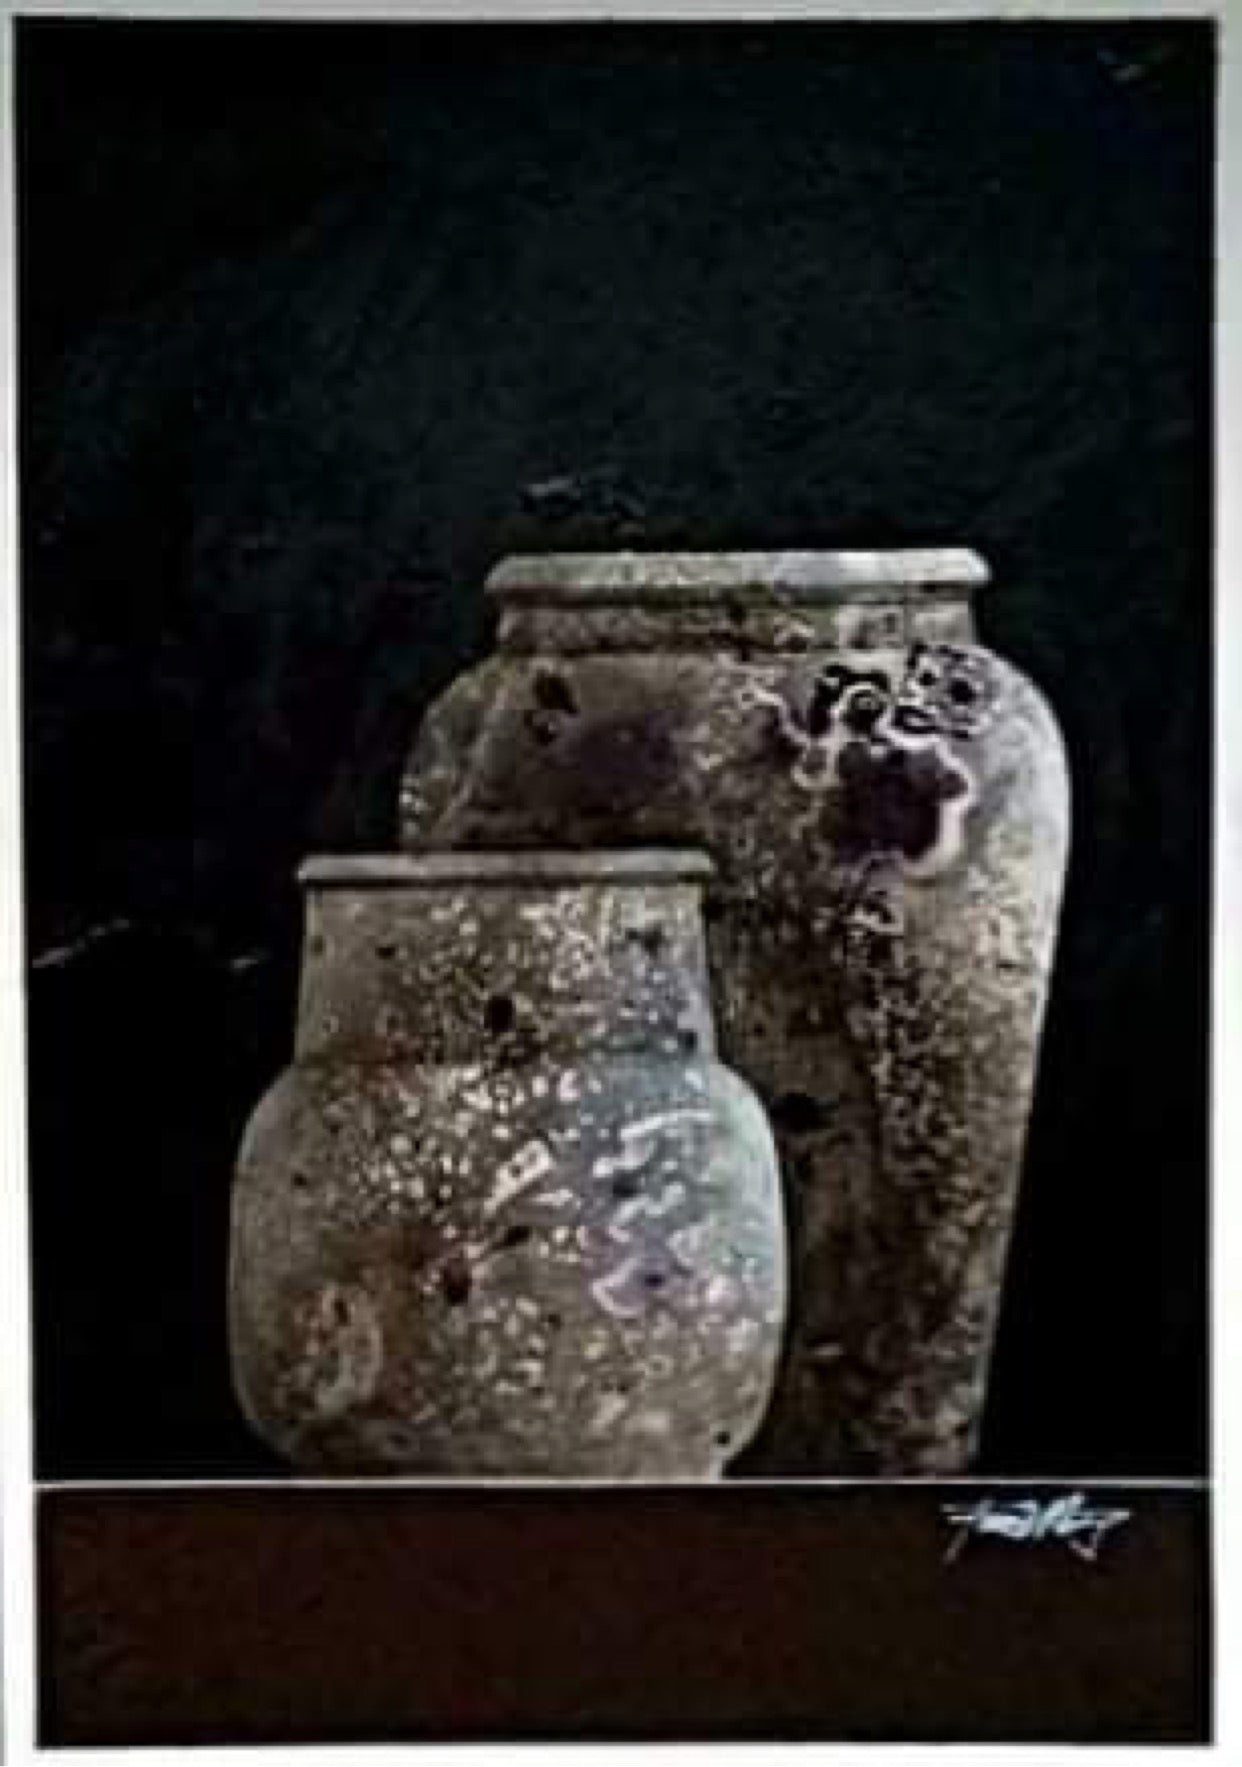 Unearthed Jars #4